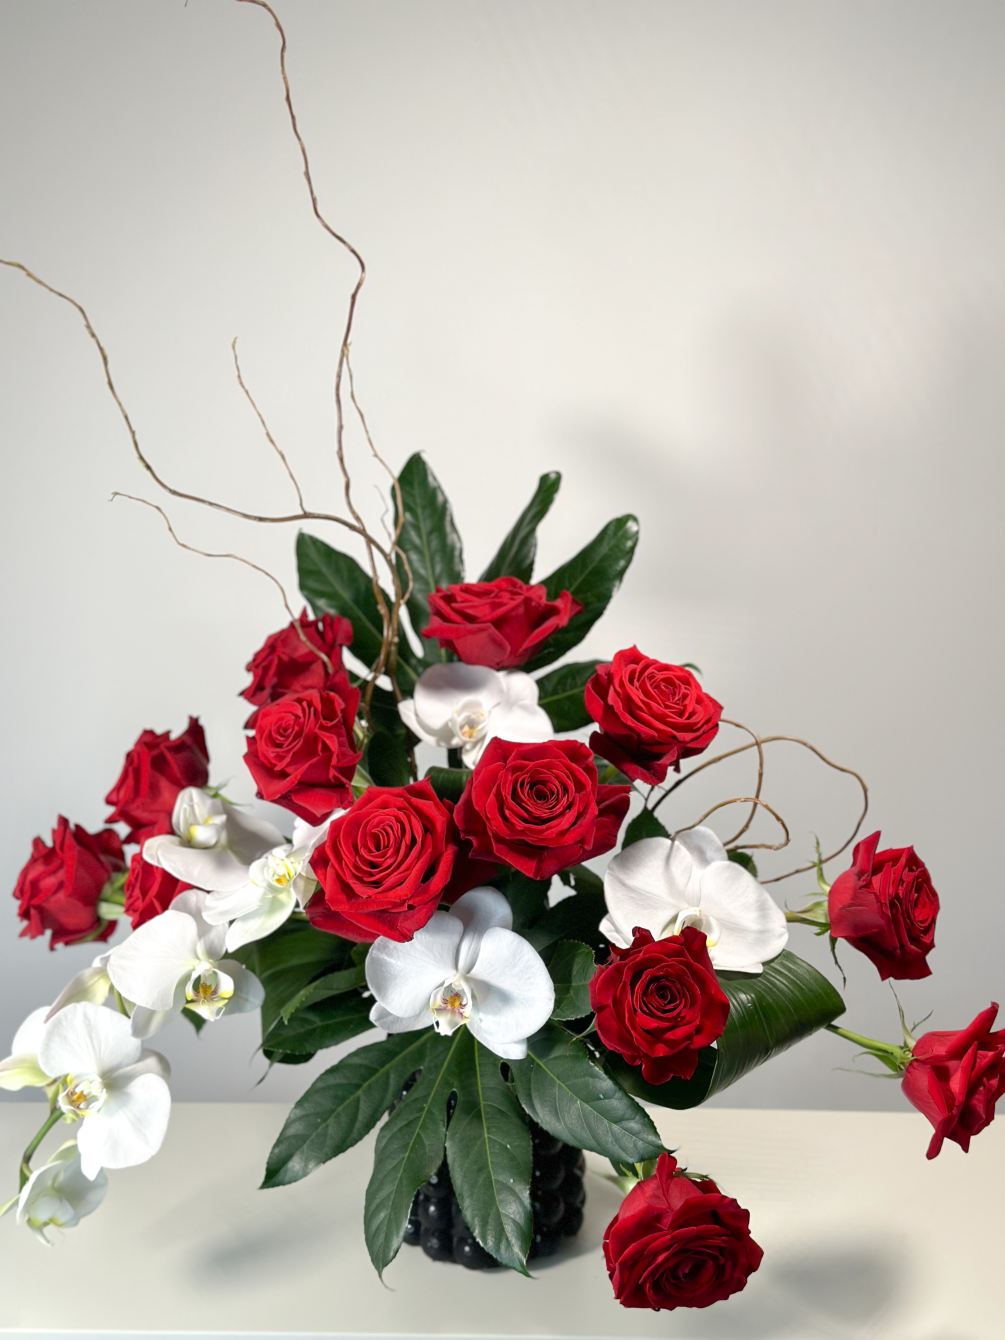 The arrangement of 18 stems of Red Ecuadorian Roses and White Phalaonapsis